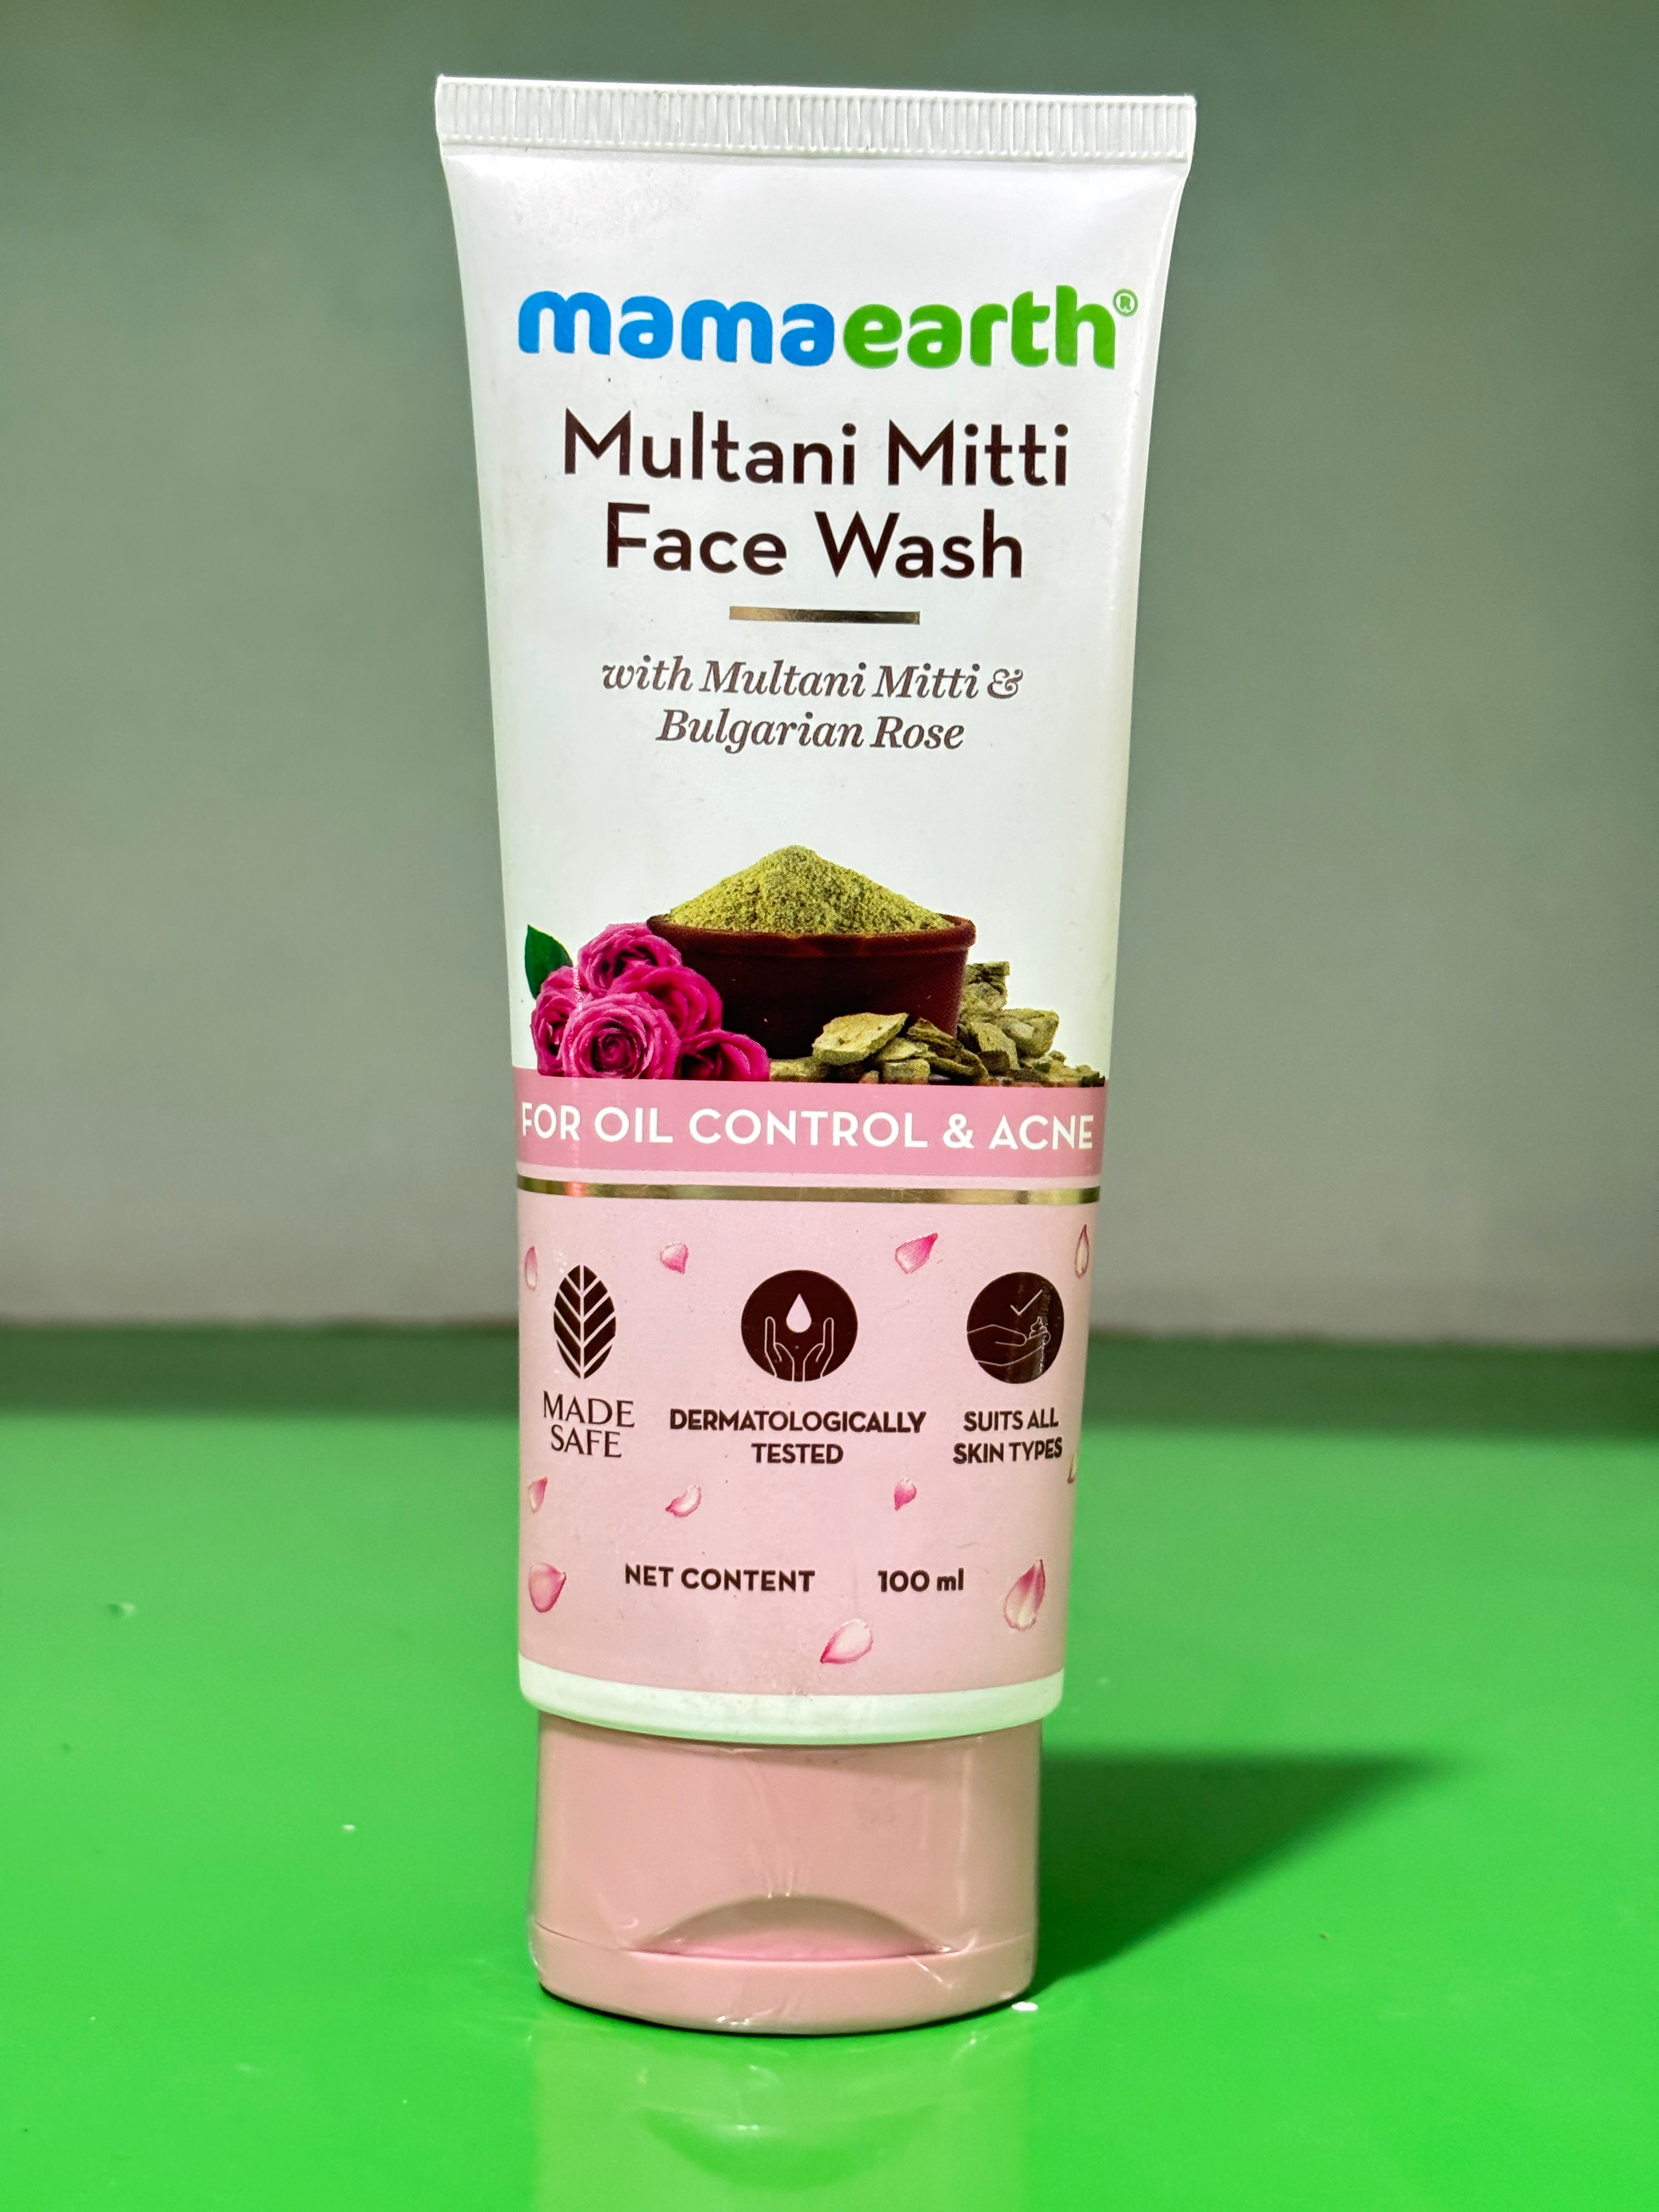 MAMAEARTH Multani Mitti Face Wash with Bulgarian Rose | Gentle Cleanser for Acne and Oil Control | Hydrating &amp; Moisturizing Facial Care | 3.38 Fl Oz (100ml)